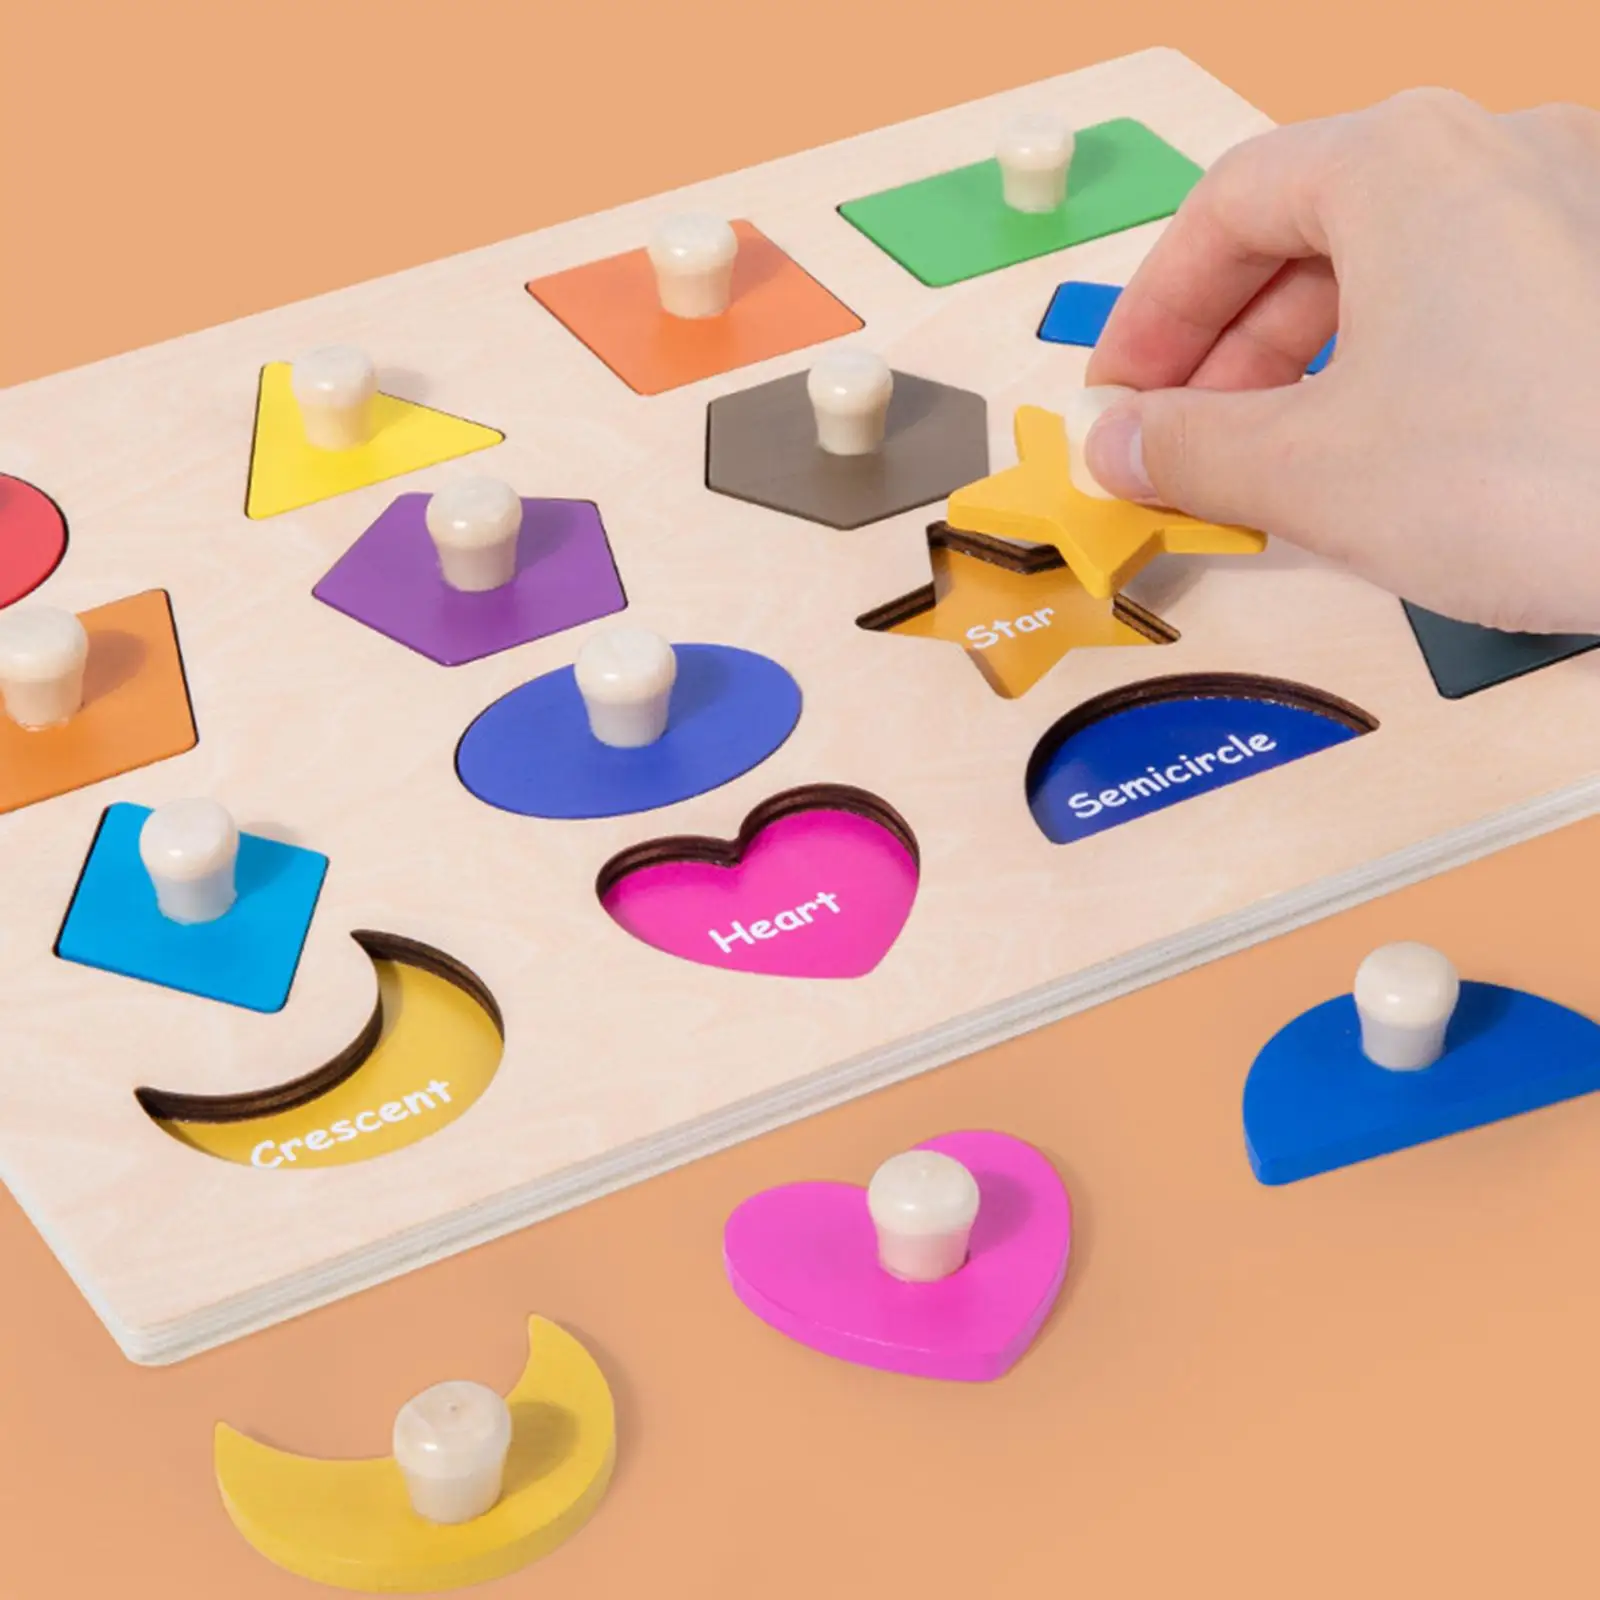 Shape Matching Puzzles Learning Early Educational for Preschool Ages 3 4 5 Years